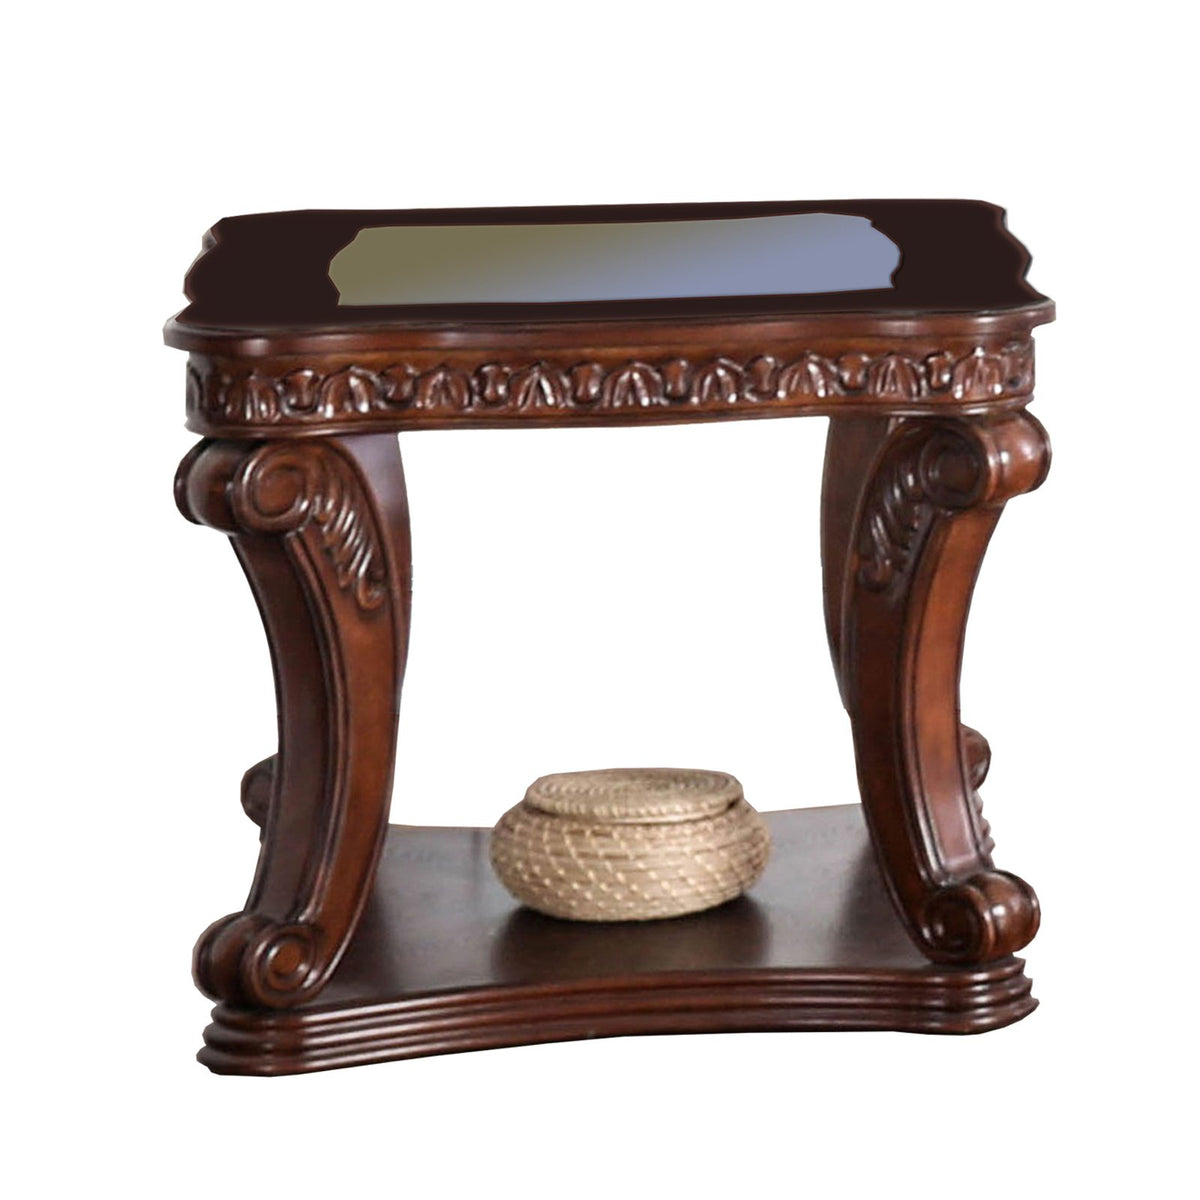 Traditional End Table with Cabriole Legs and Wooden Carving, Brown - BM205360